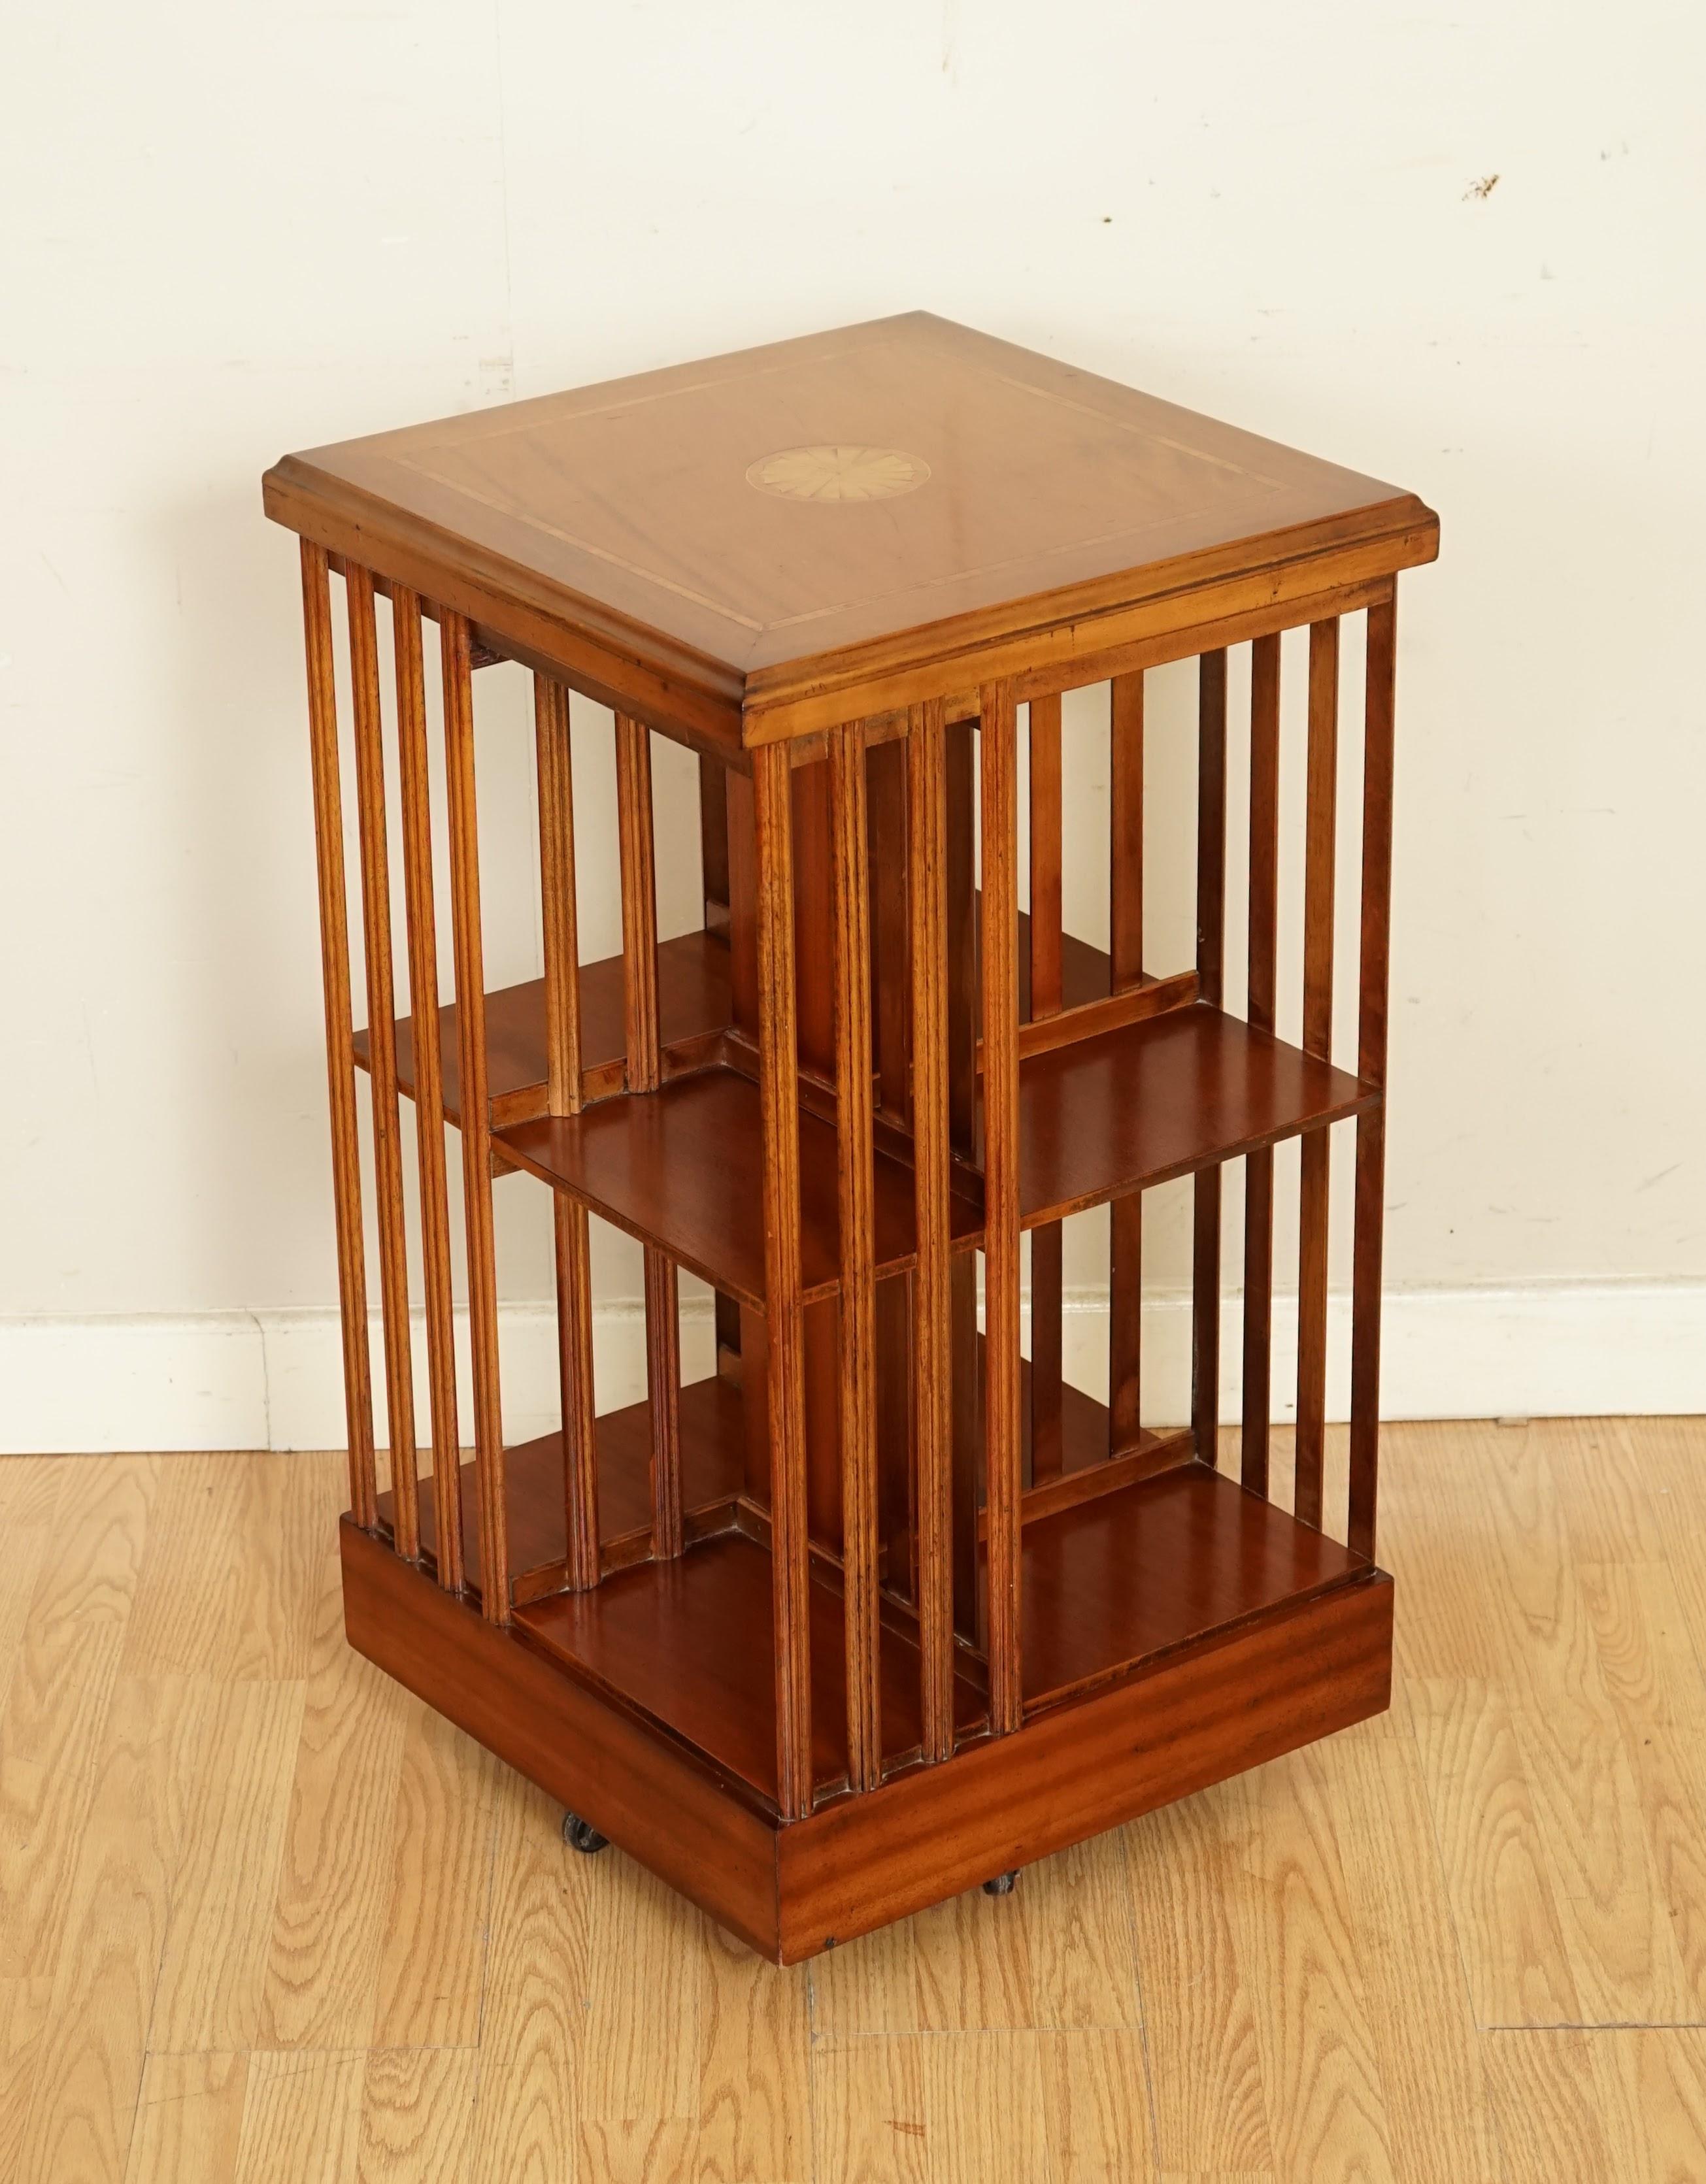 We are so excited to present to you this beautiful Sheraton revival revolving bookcase.

This is a solid very well made and decorative piece, it was made in the Sheraton Revival style.

Please carefully look at the pictures to see the condition